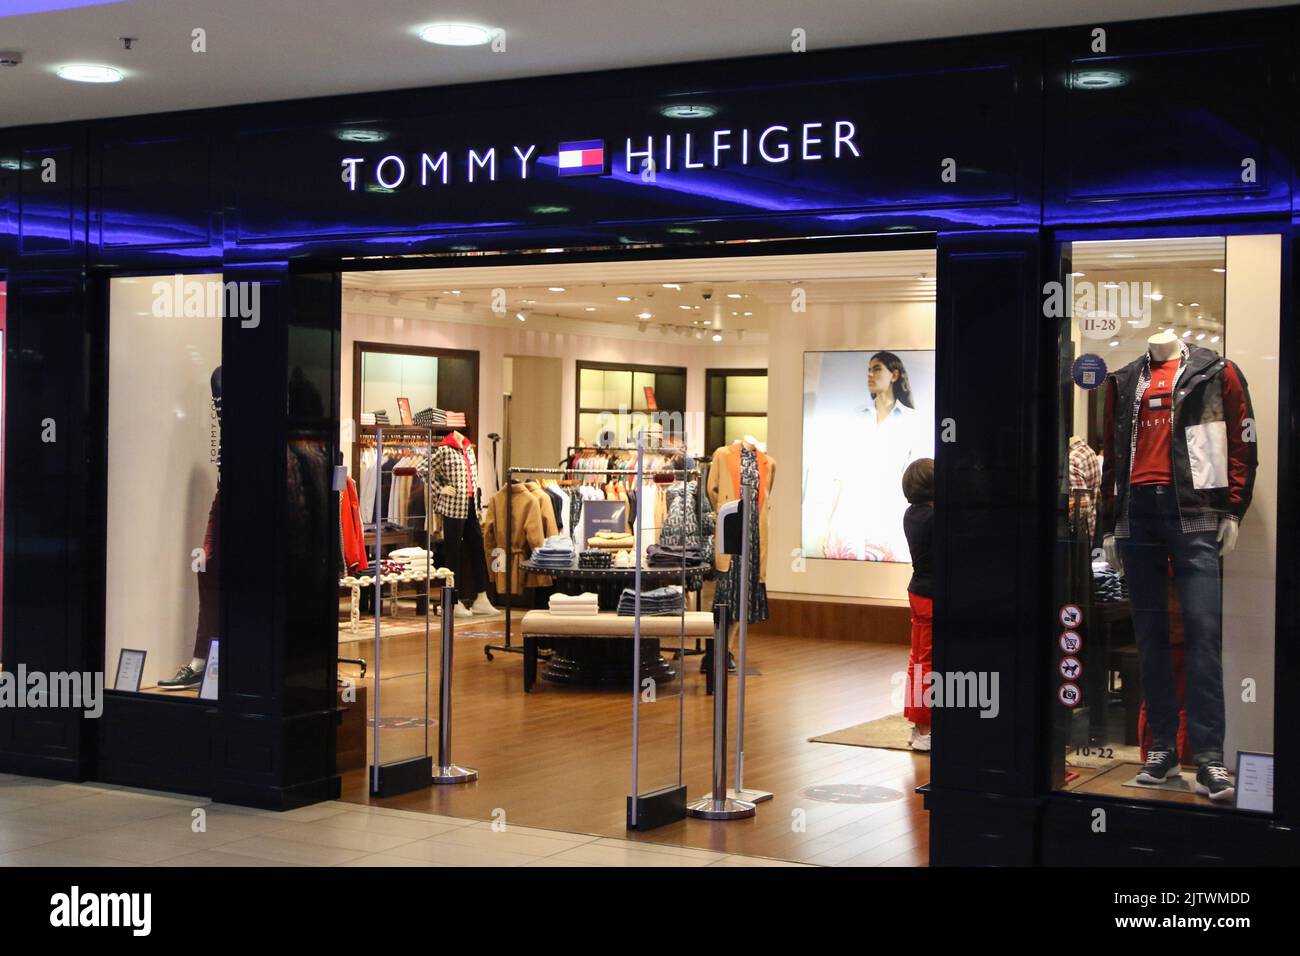 Tommy hilfiger usa hi-res stock and images -